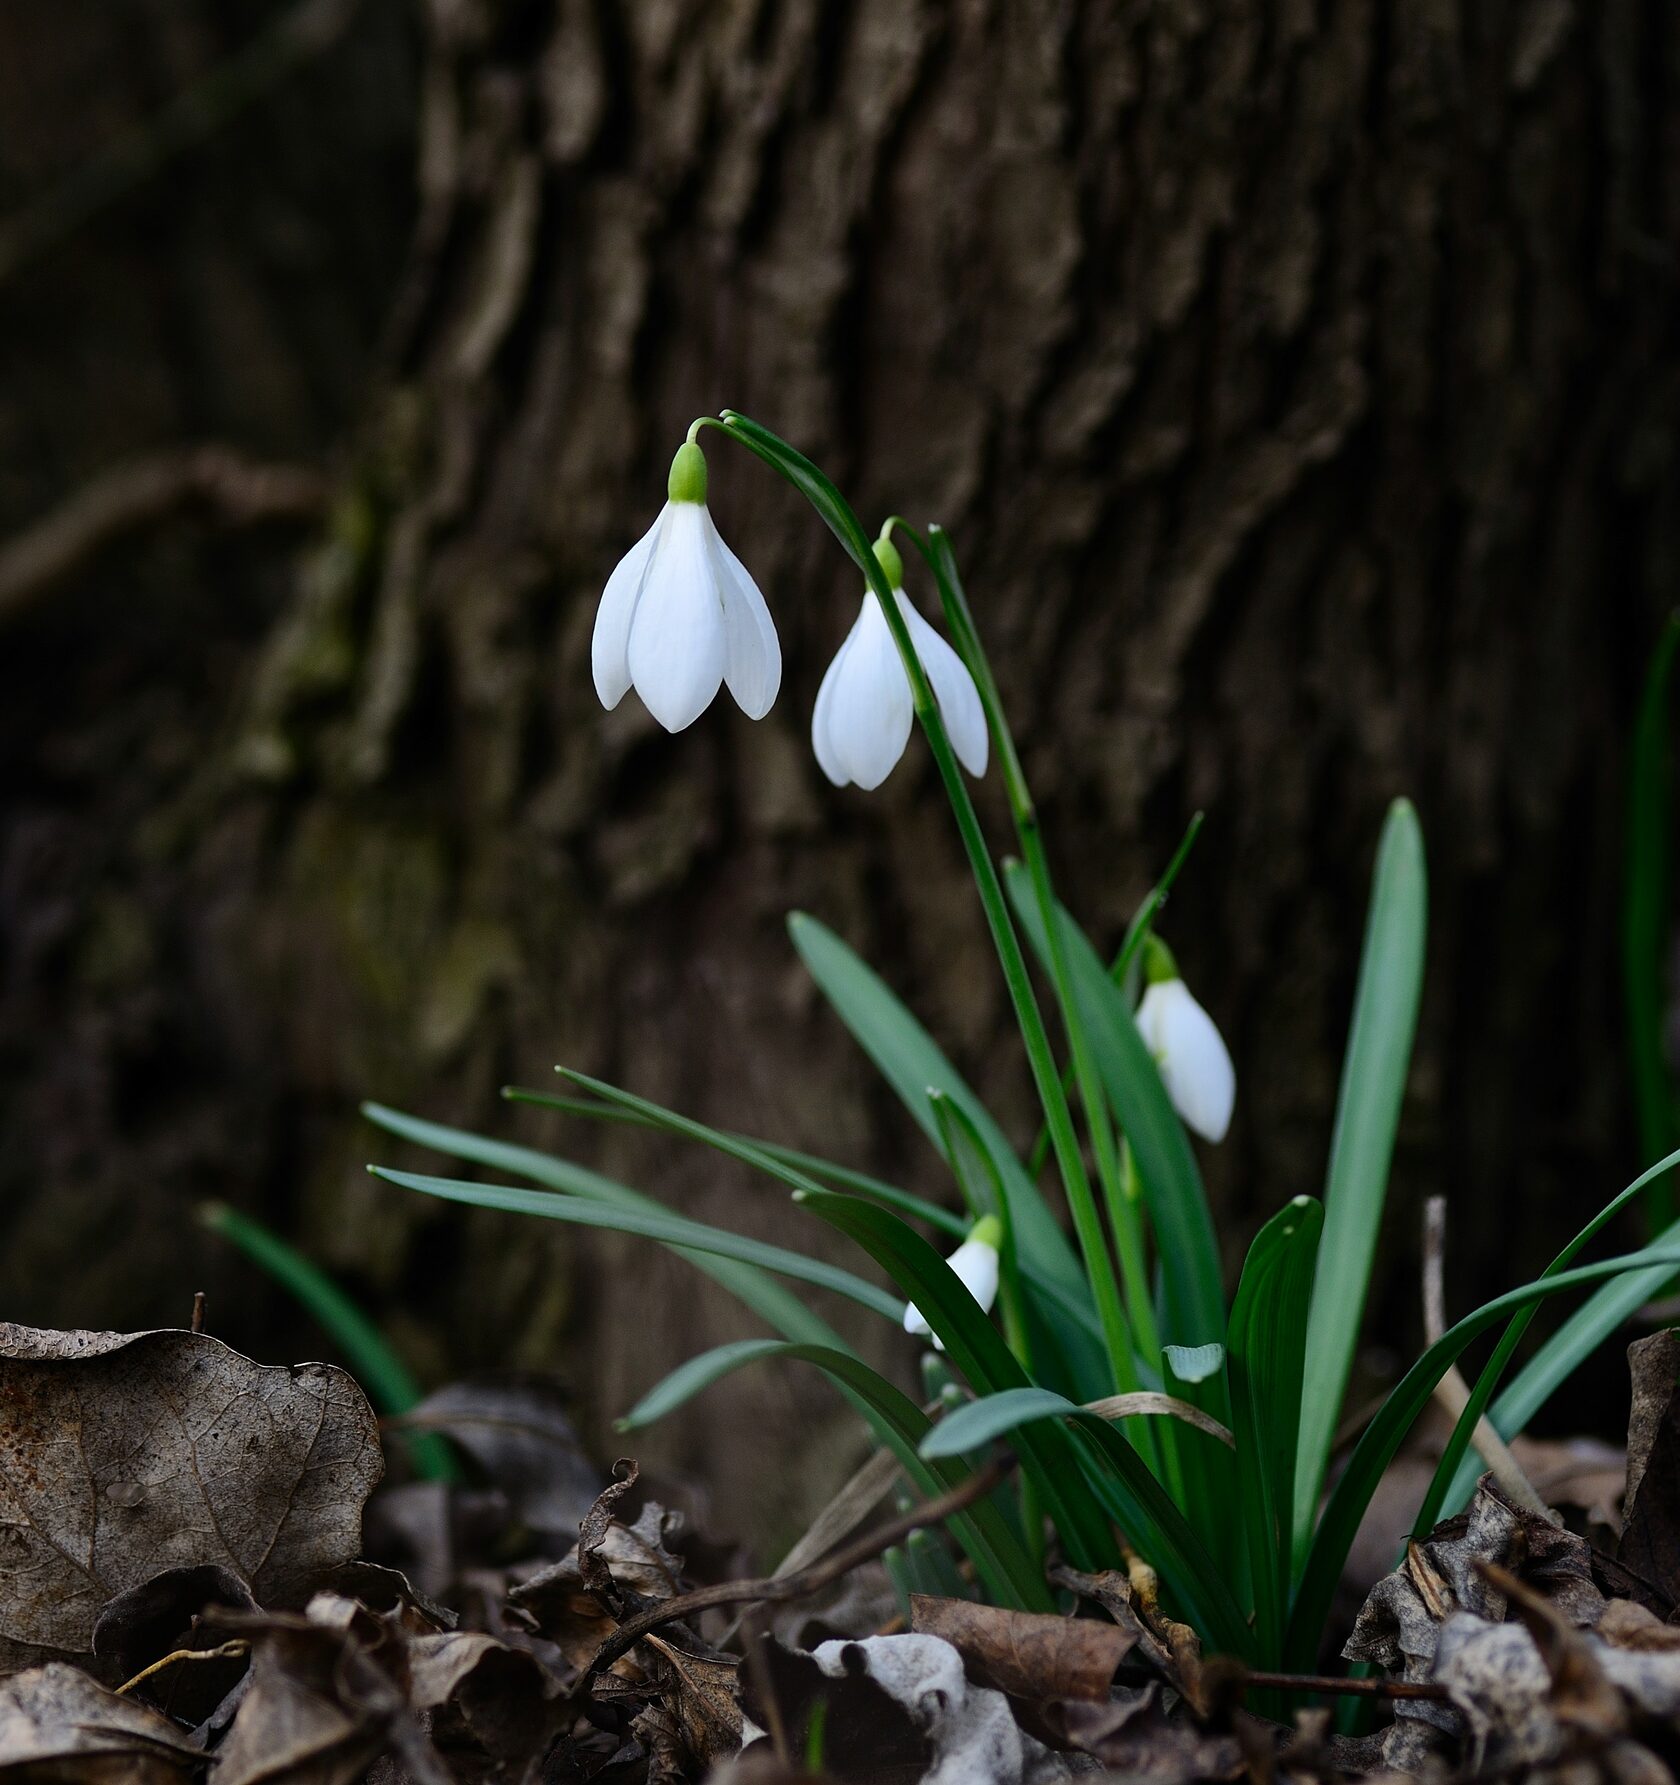 Two flowers in the foreground naturally hanging down. The rest of the image is filled with out of focus flowers, leaves and a tree trunk.